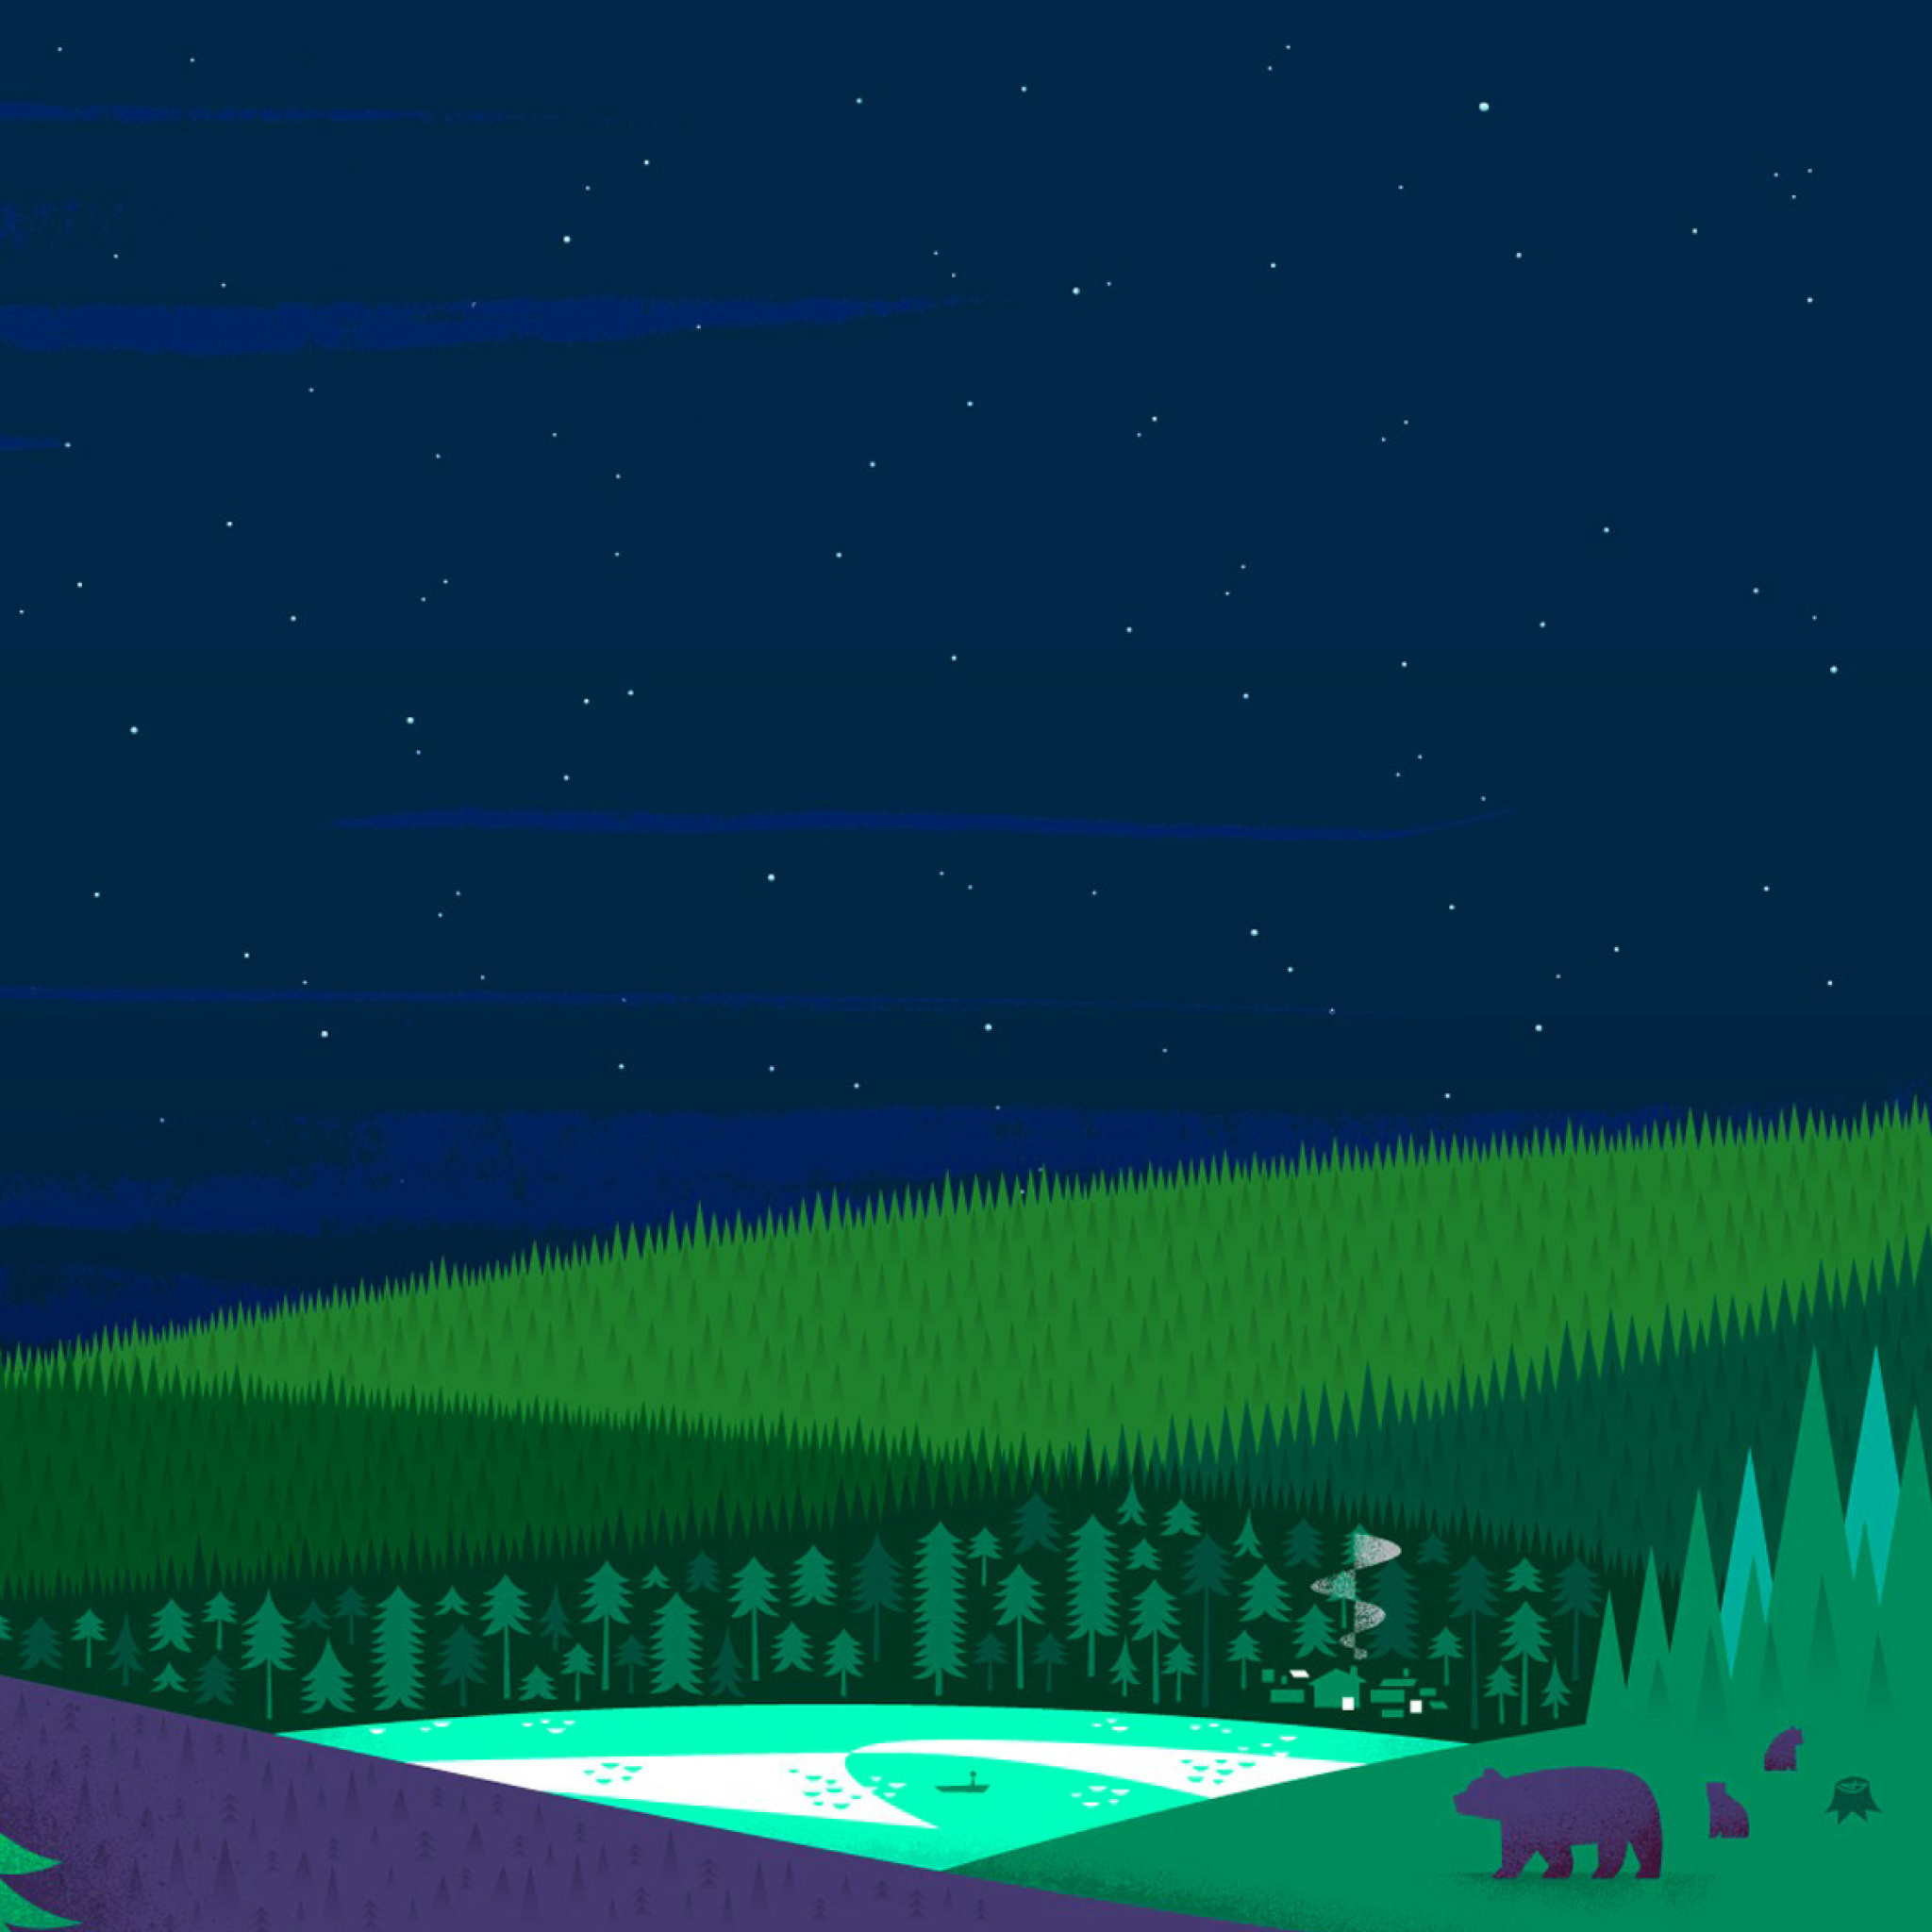 Graphics night and bears in forest screenshot #1 2048x2048